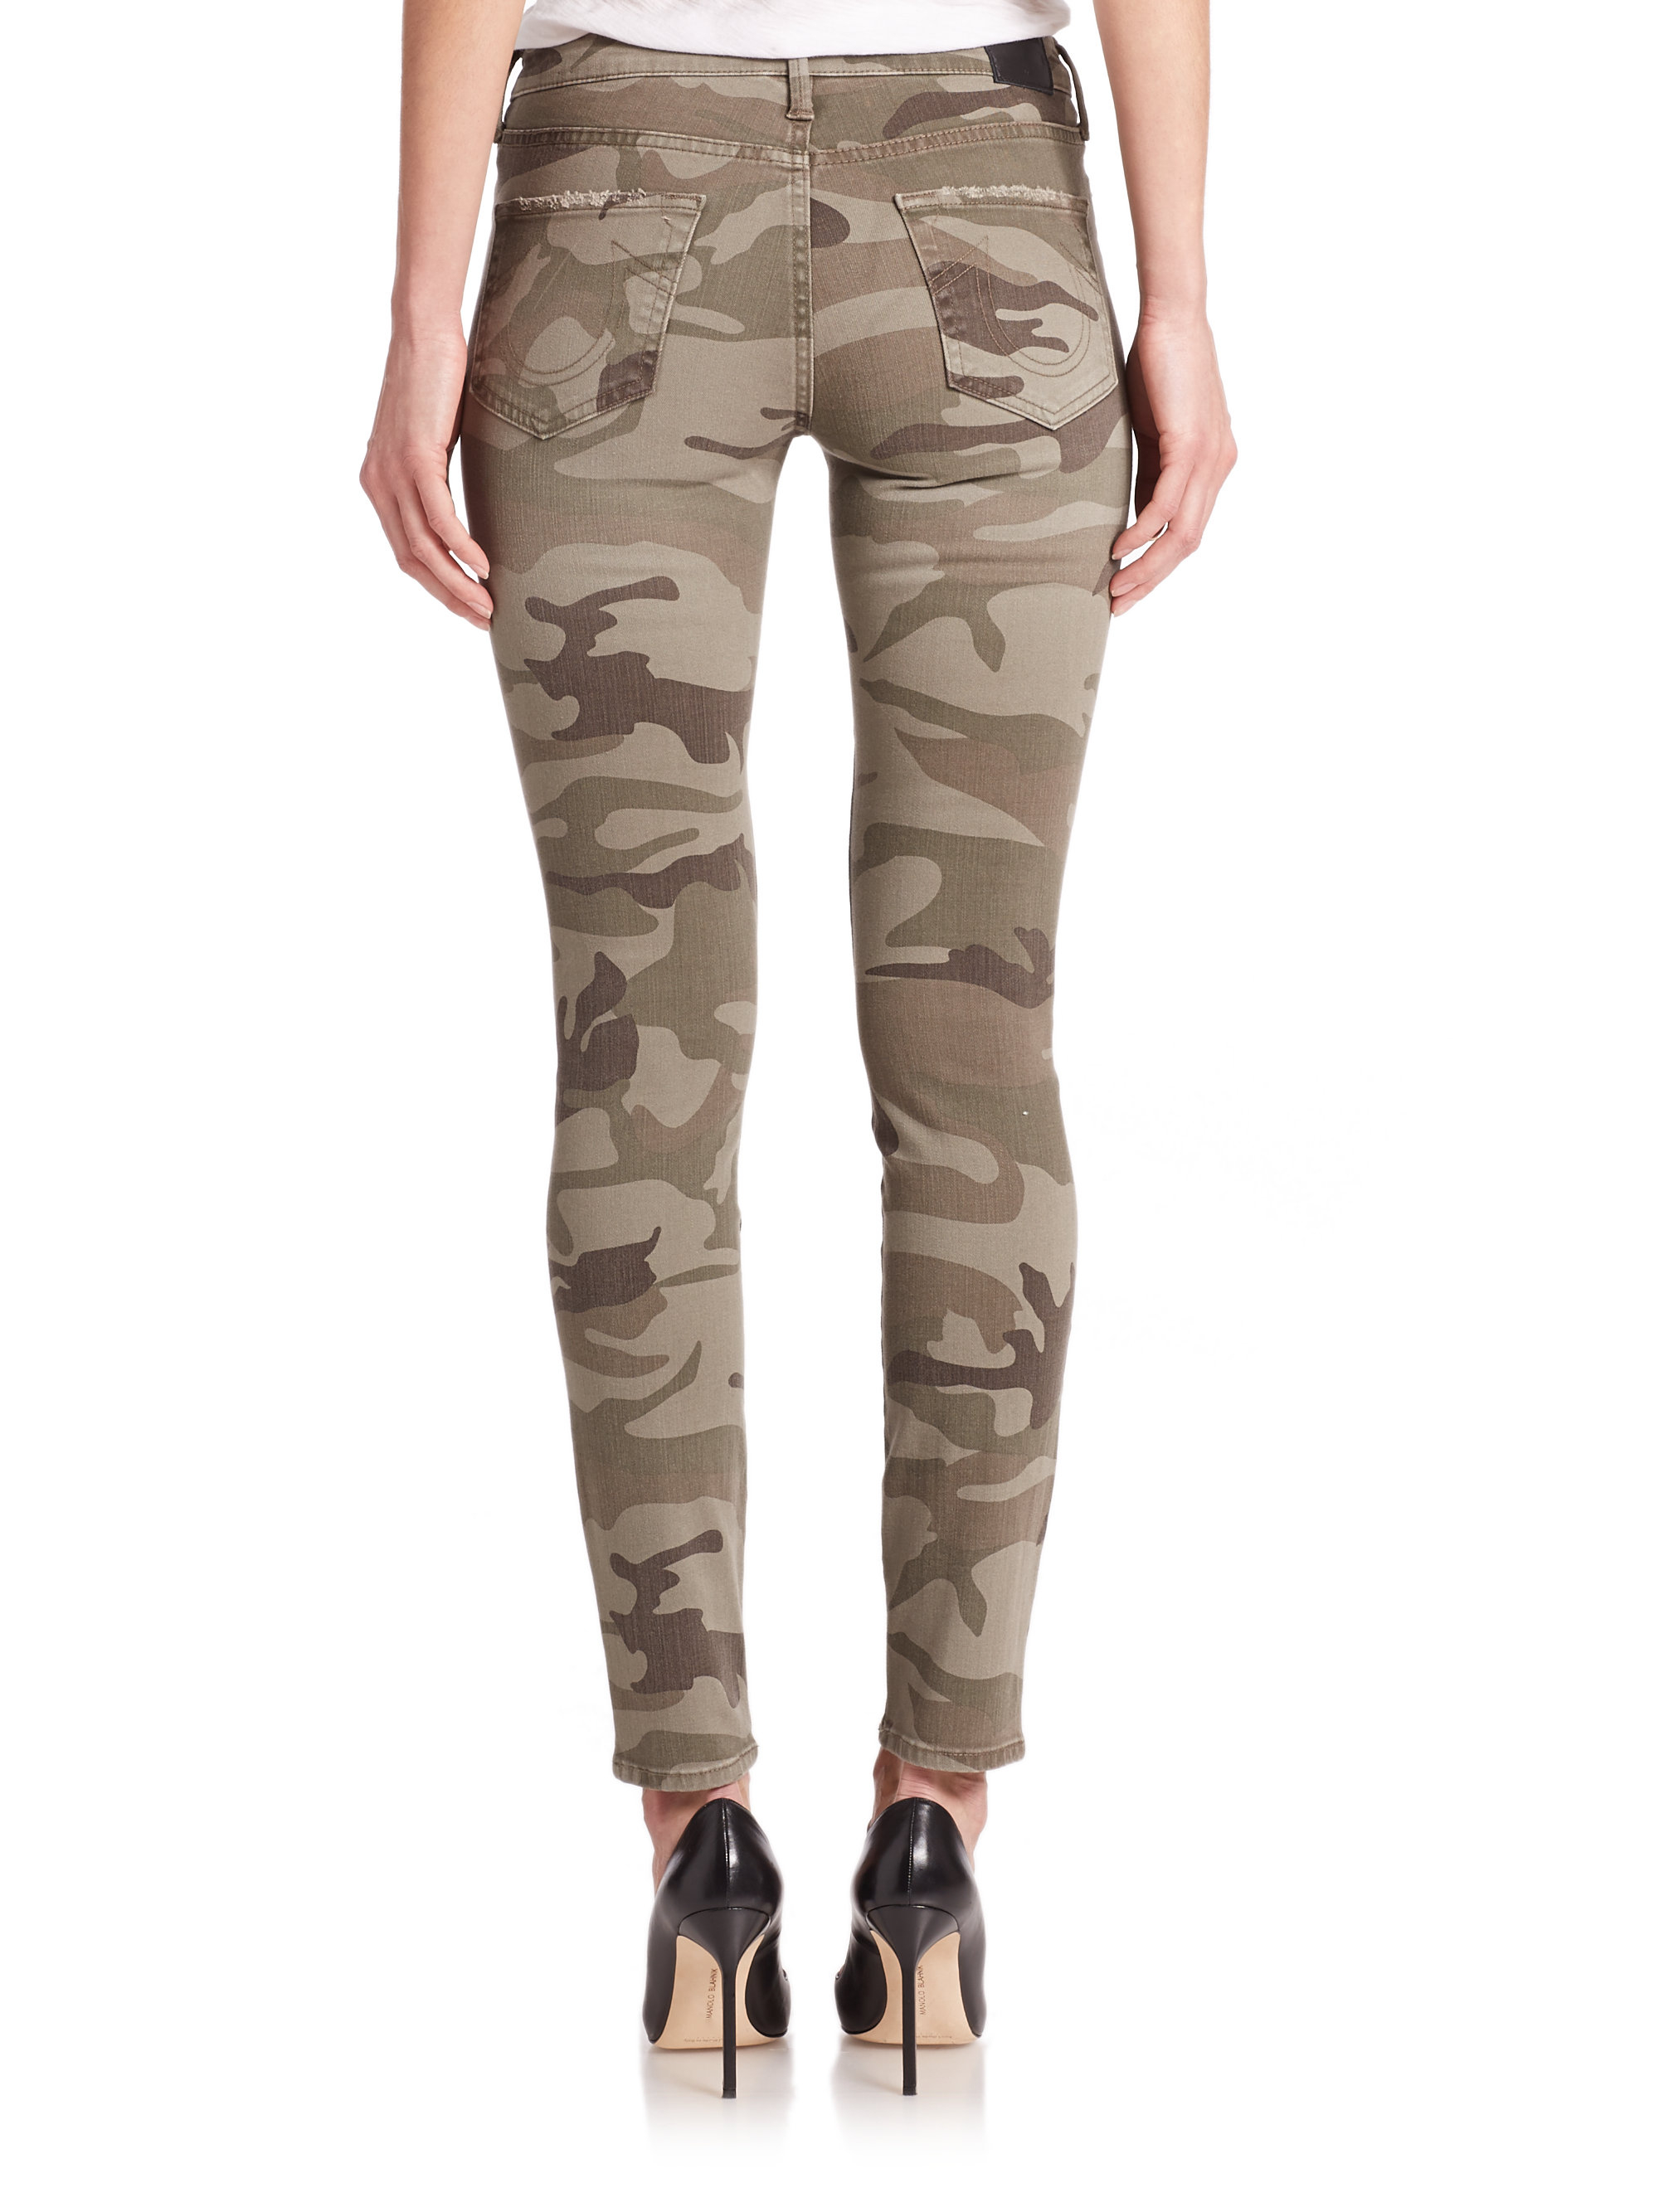 True religion Halle High-rise Distressed Camo-print Skinny Jeans in ...